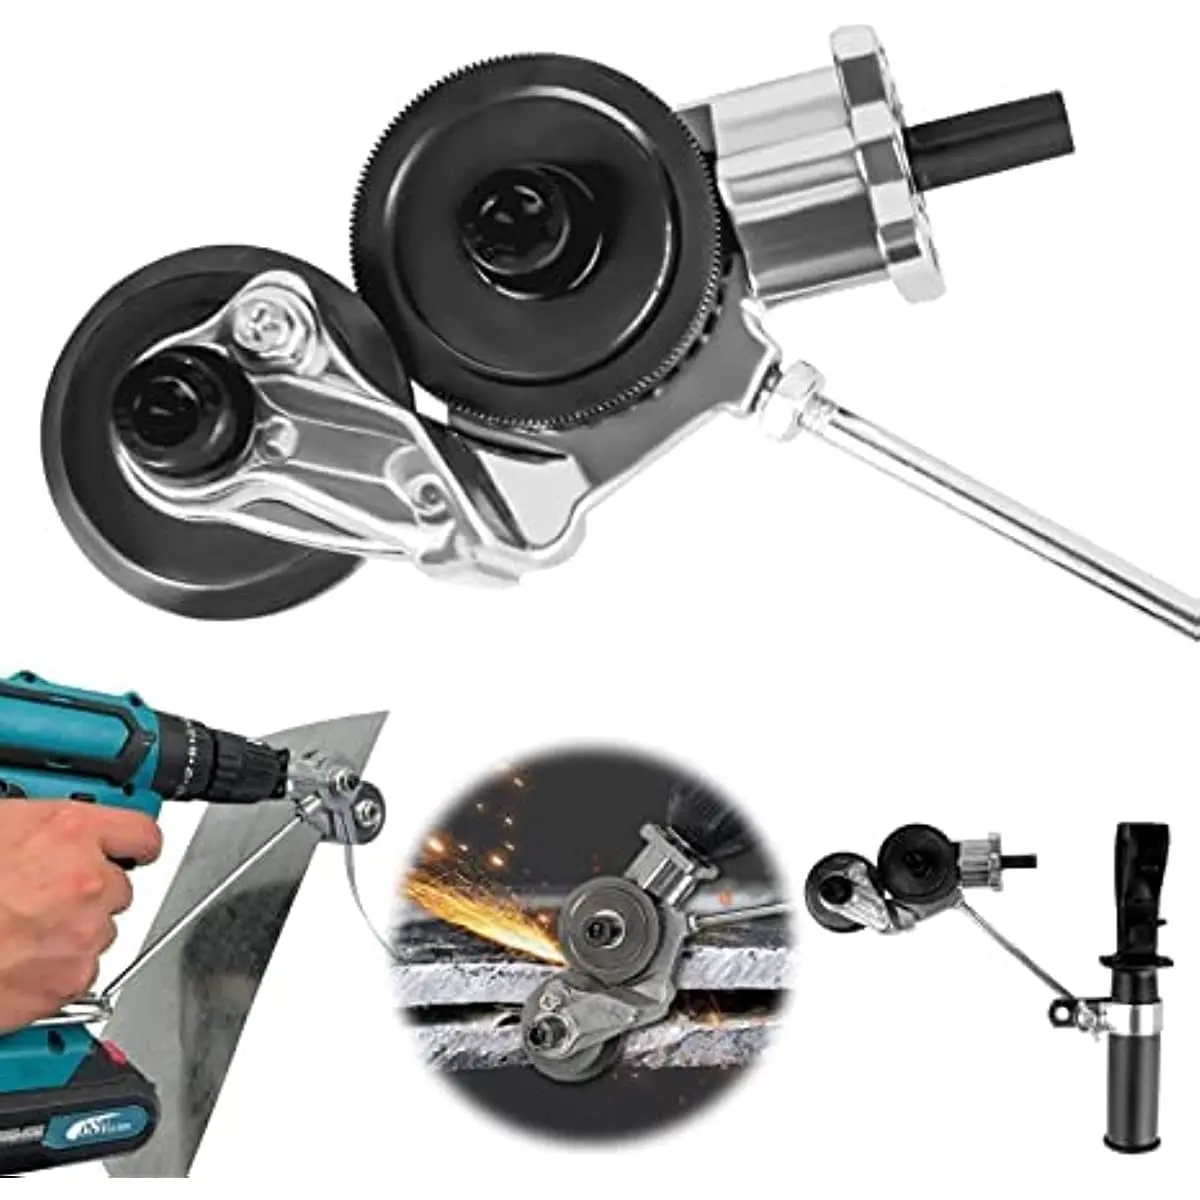 🔥FREE SHIPPING🔥Electric Drill Plate Cutter, Universal Metal Nibbler Drill  Attachment with Adapter - Drills, Facebook Marketplace